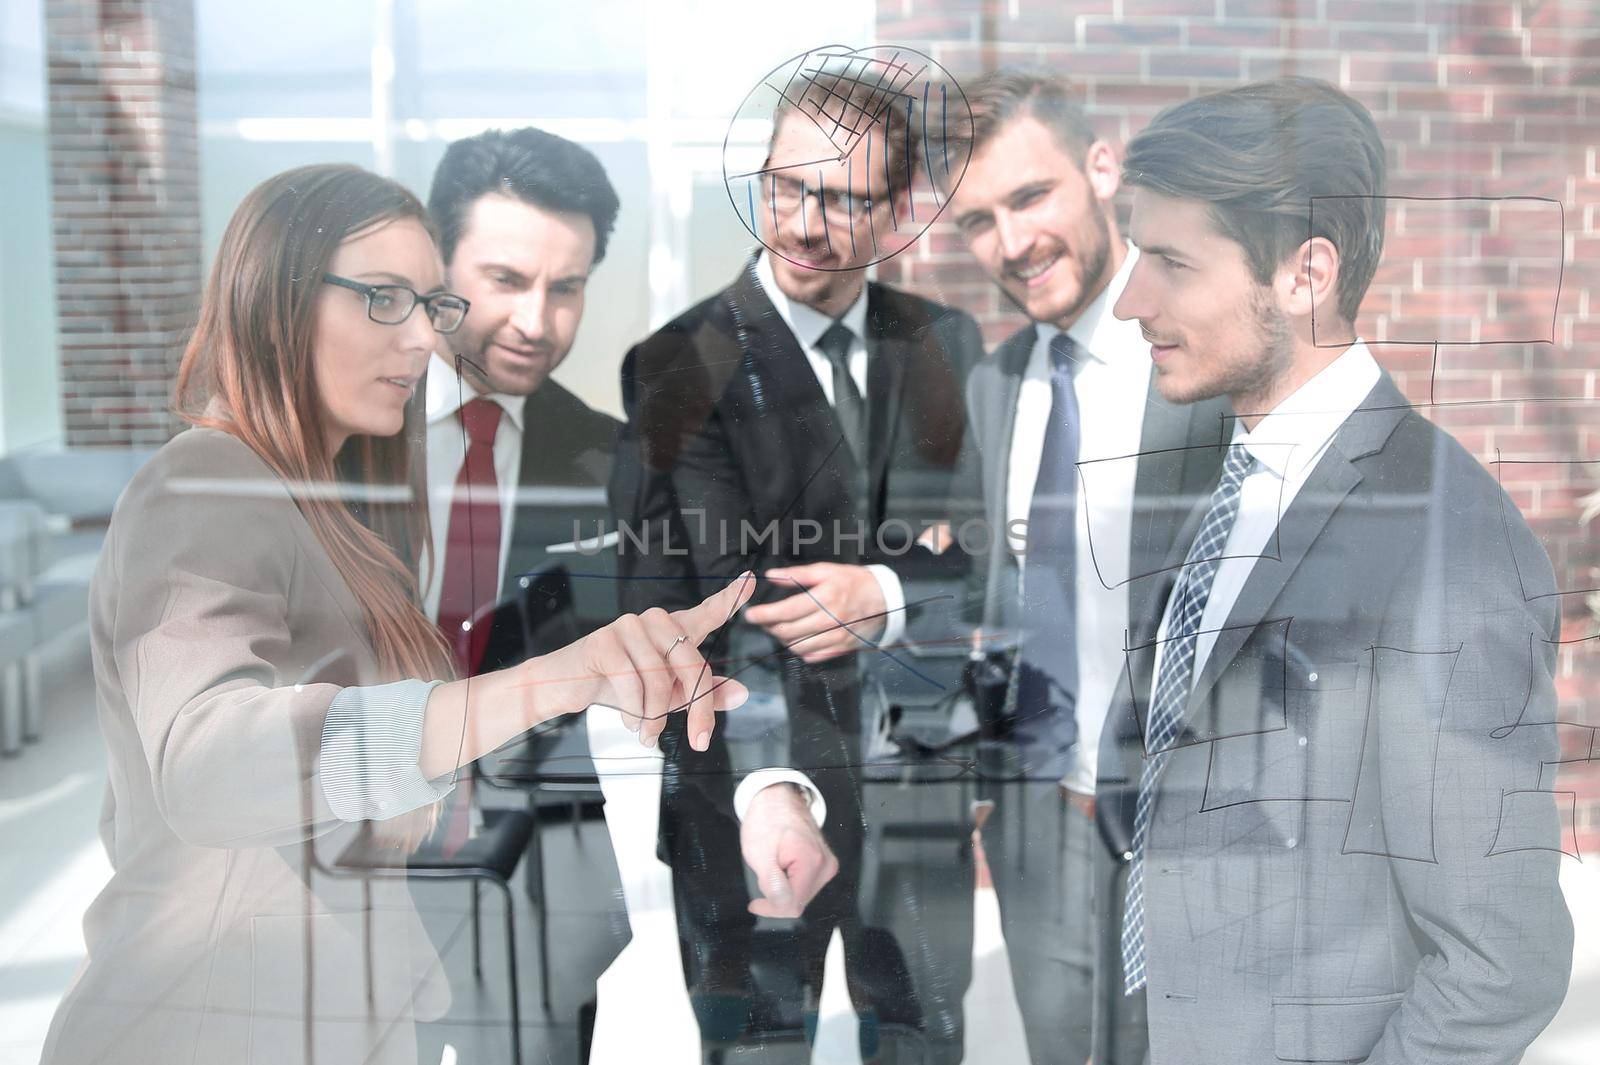 Wide angle of business meeting in modern office behind glass windows, shot from outside building